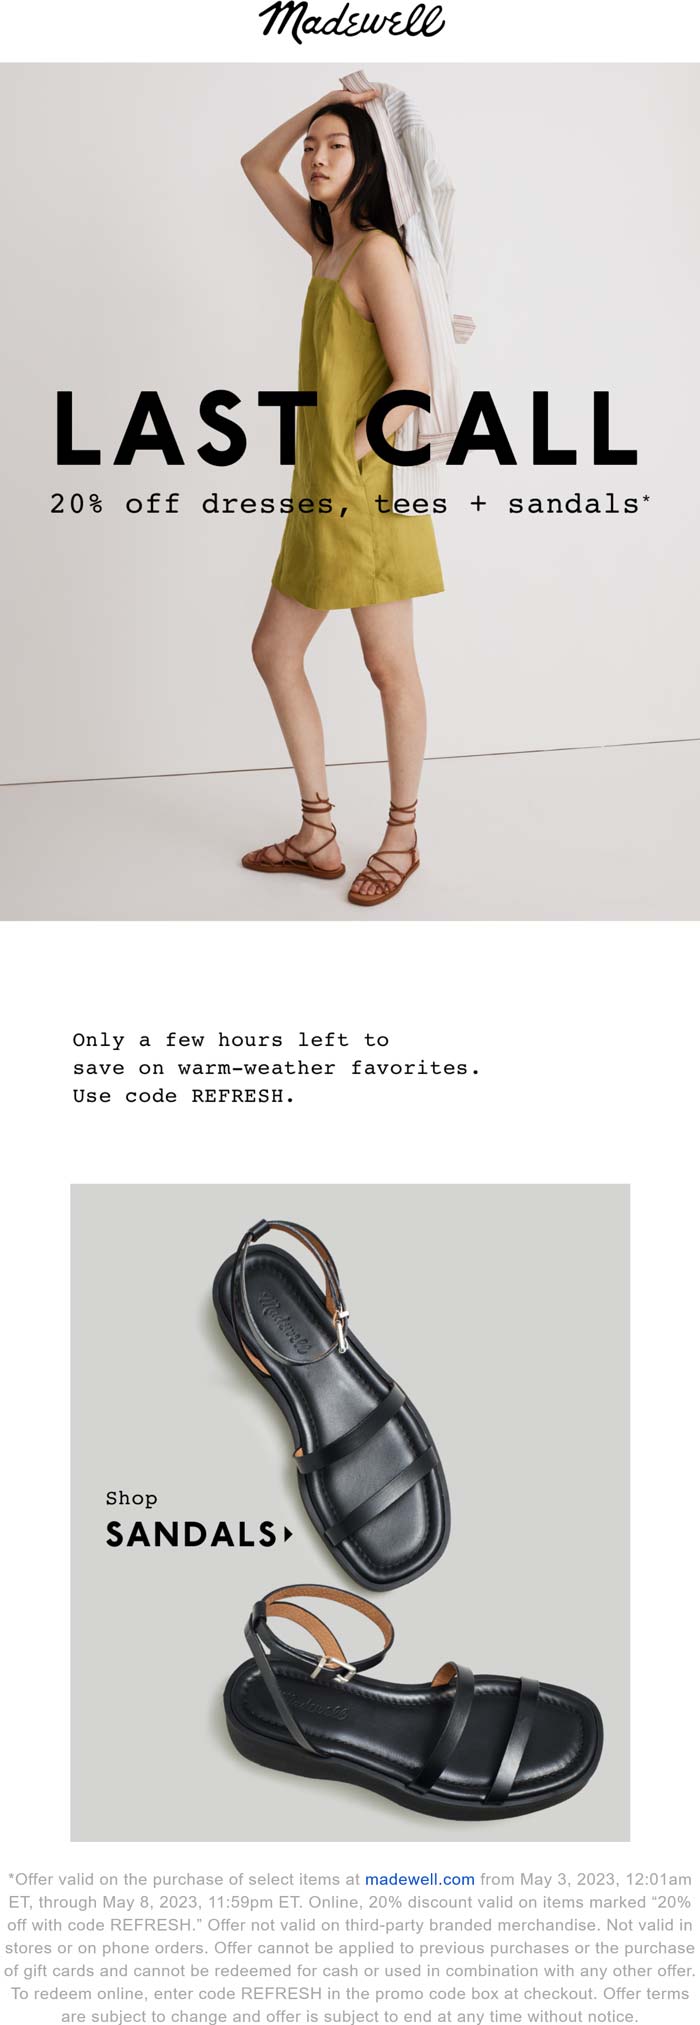 Madewell stores Coupon  20% off dresses tees & sandals at Madewell via promo code REFRESH #madewell 